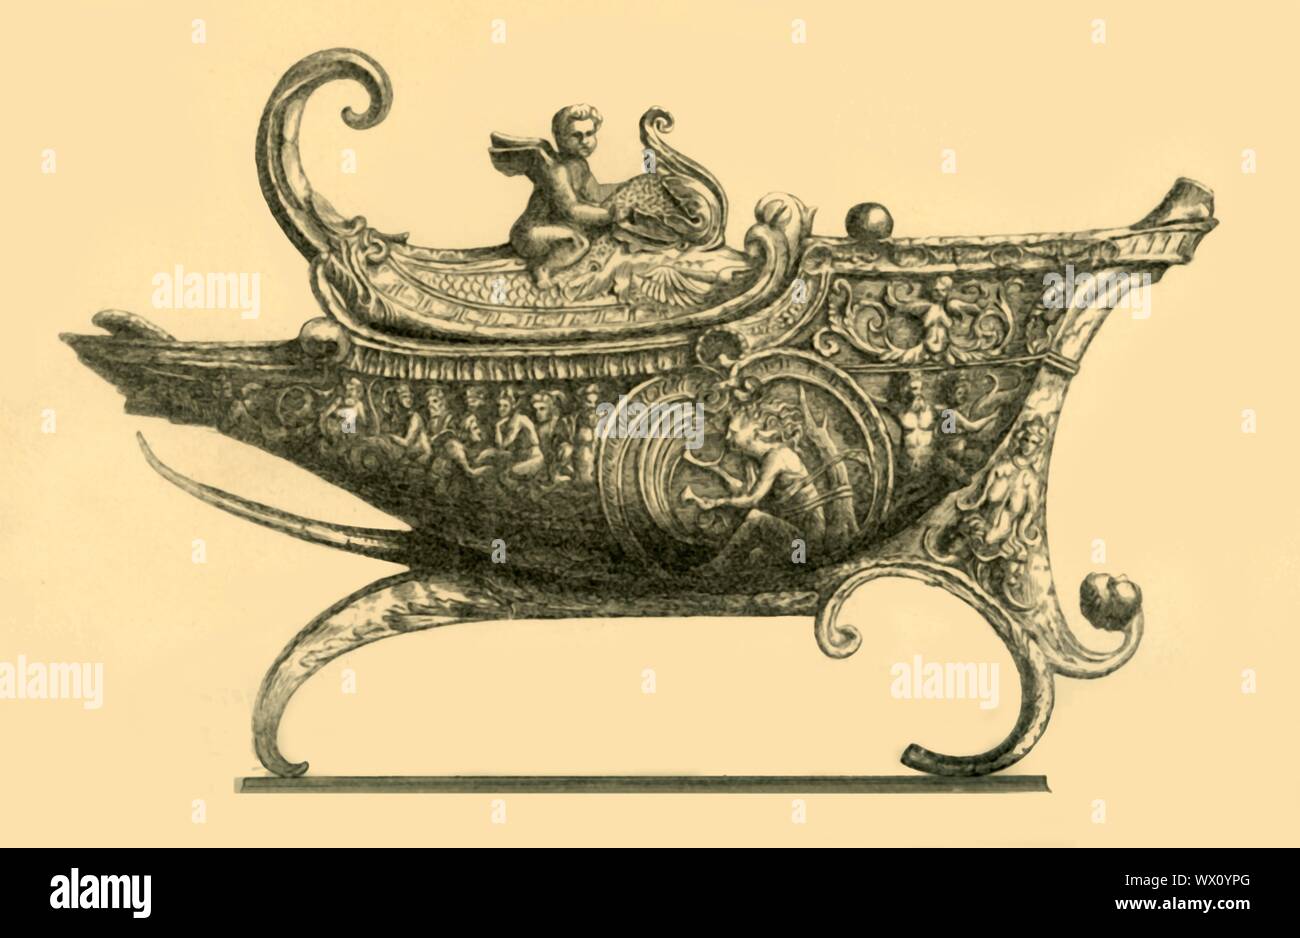 The Cadogan Lamp, c1507-1510, (1881). Etching of a bronze oil lamp made in the early 16th century in Padua, Italy, by Andrea Riccio, and acquired at the Cadogan sale in 1865. The lamp is in the form of an ancient galley or fantastical ship, with a statuette of a cupid riding a dolphin in the cover. On the side is a youth blowing a horn into a billowing sail, representing the motto 'make haste slowly'. From &quot;The South Kensington Museum&quot;, a book of engraved illustrations, with descriptions, of the works of art in the collection of the Victoria &amp; Albert Museum in London (formerly kn Stock Photo